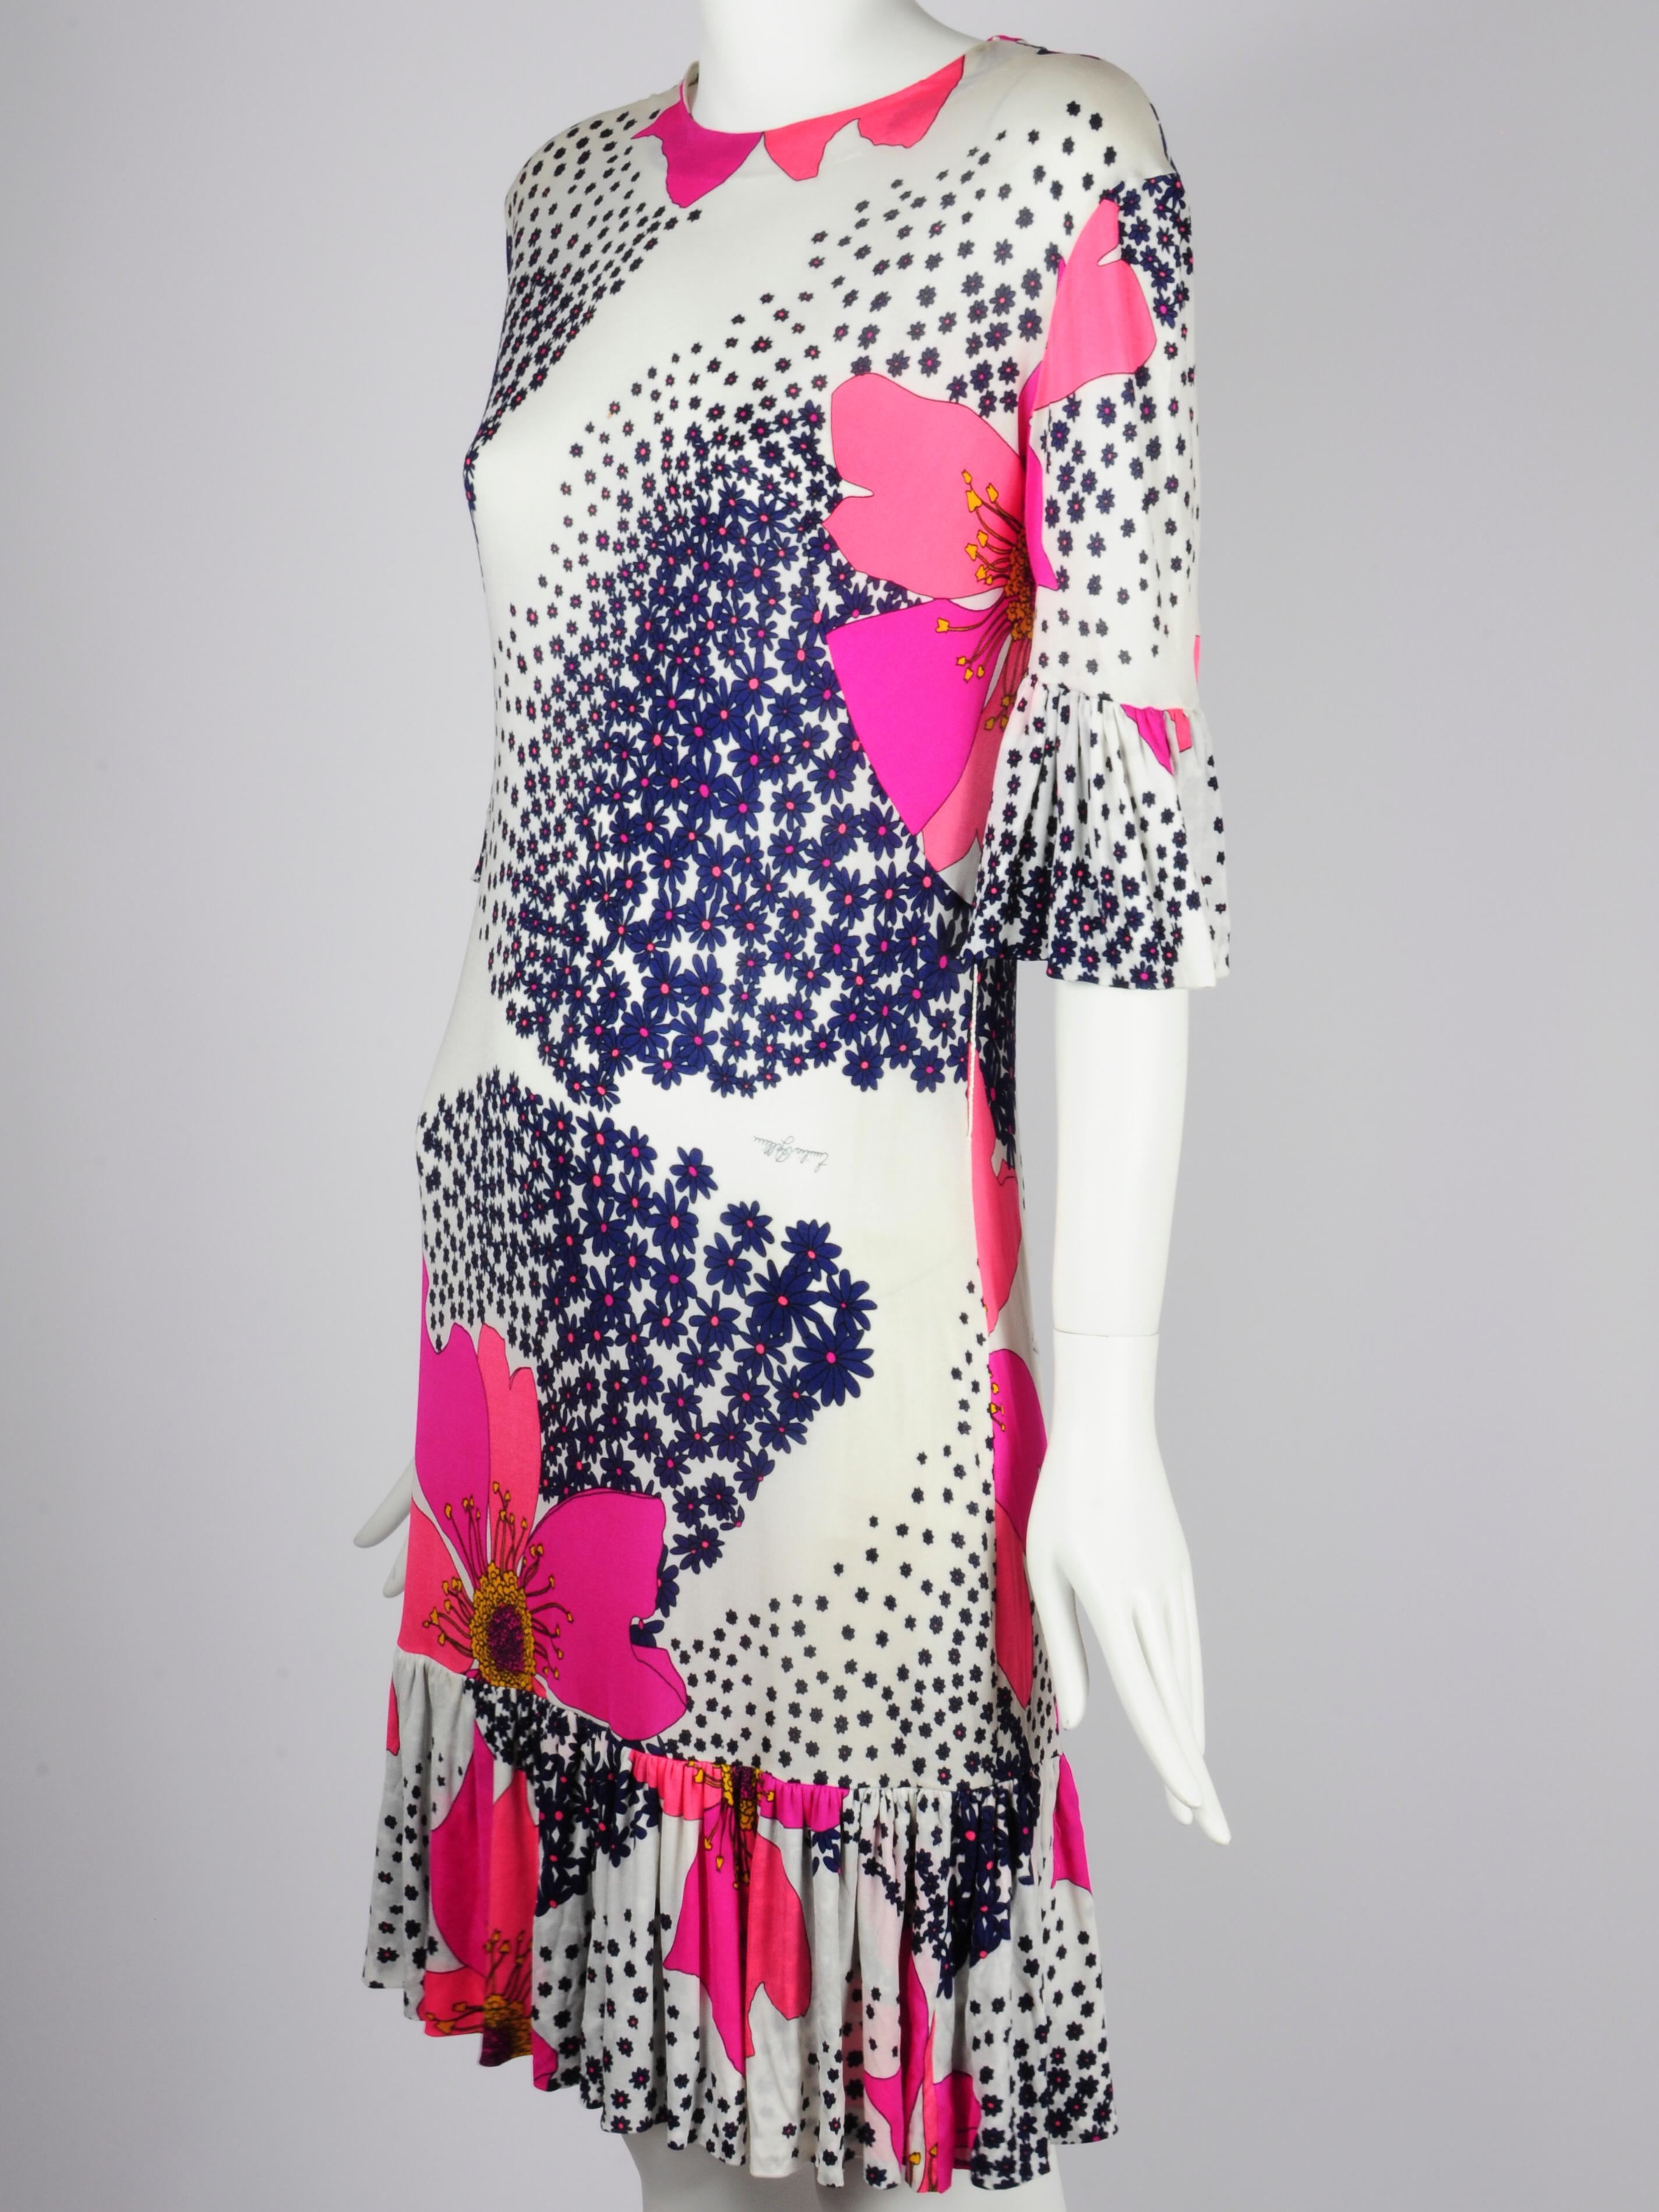 Emilia Bellini Florence silk floral print dress with ruffle detail on the bottom and bell sleeves from the 1960s. Just like Emilio Pucci, Emilia Bellini is known for signing her name inside the prints too. This dress is a little sheer but would work